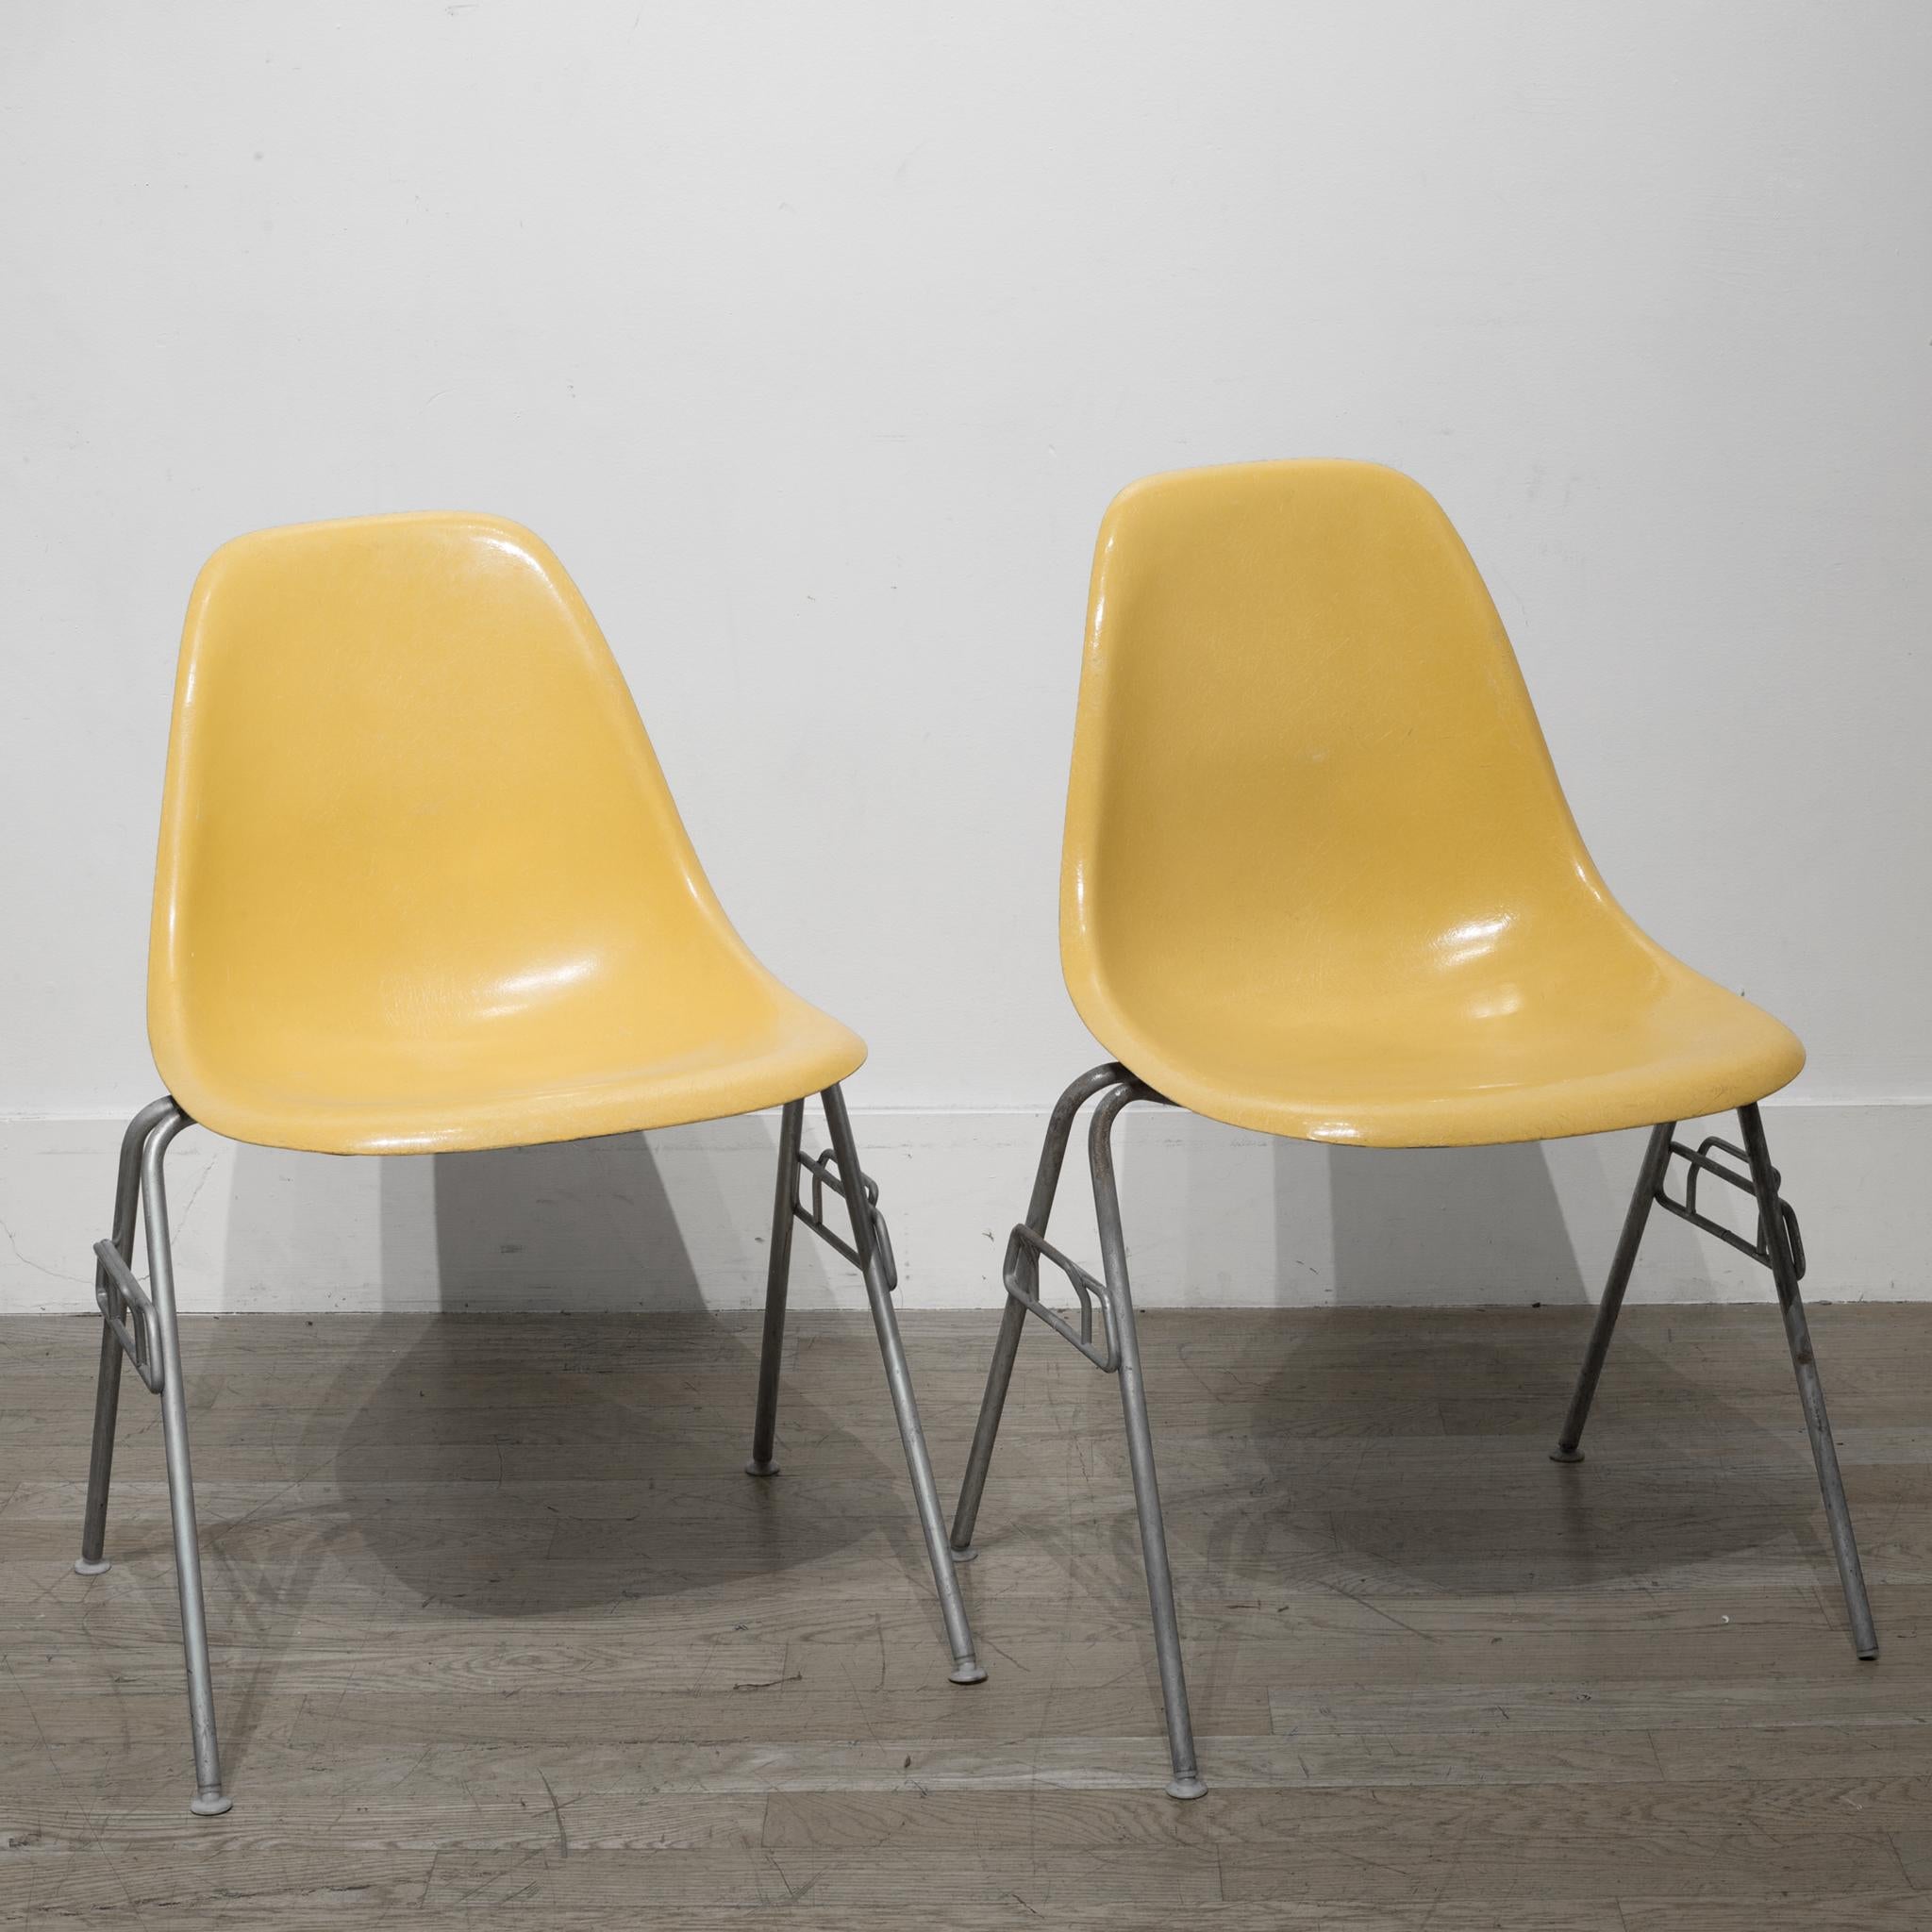 About:

A set of four stackable Eames DSS fiberglass shell chairs in Parchment mounted on their original bases. Parchment is one of the original colors for this iconic chair.

Creator: Charles & Ray Eames for Herman Miller.
Date of manufacture: